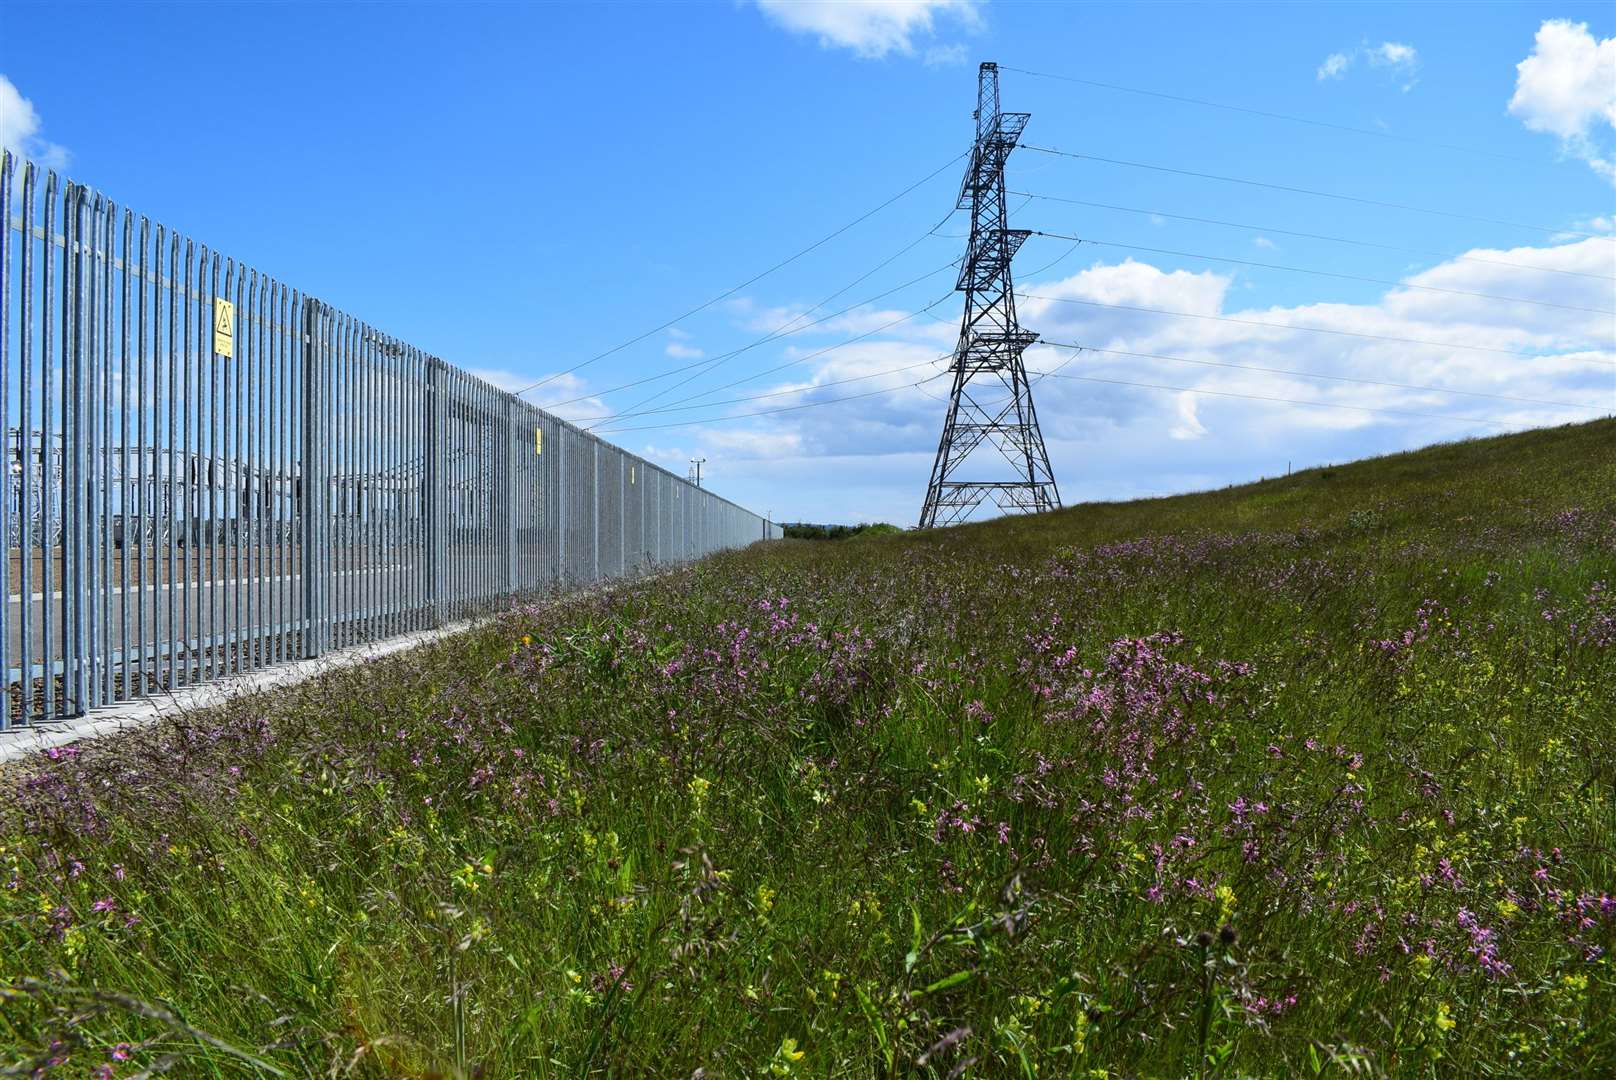 The Thurso South substation wildflower meadow where the rare species was observed.